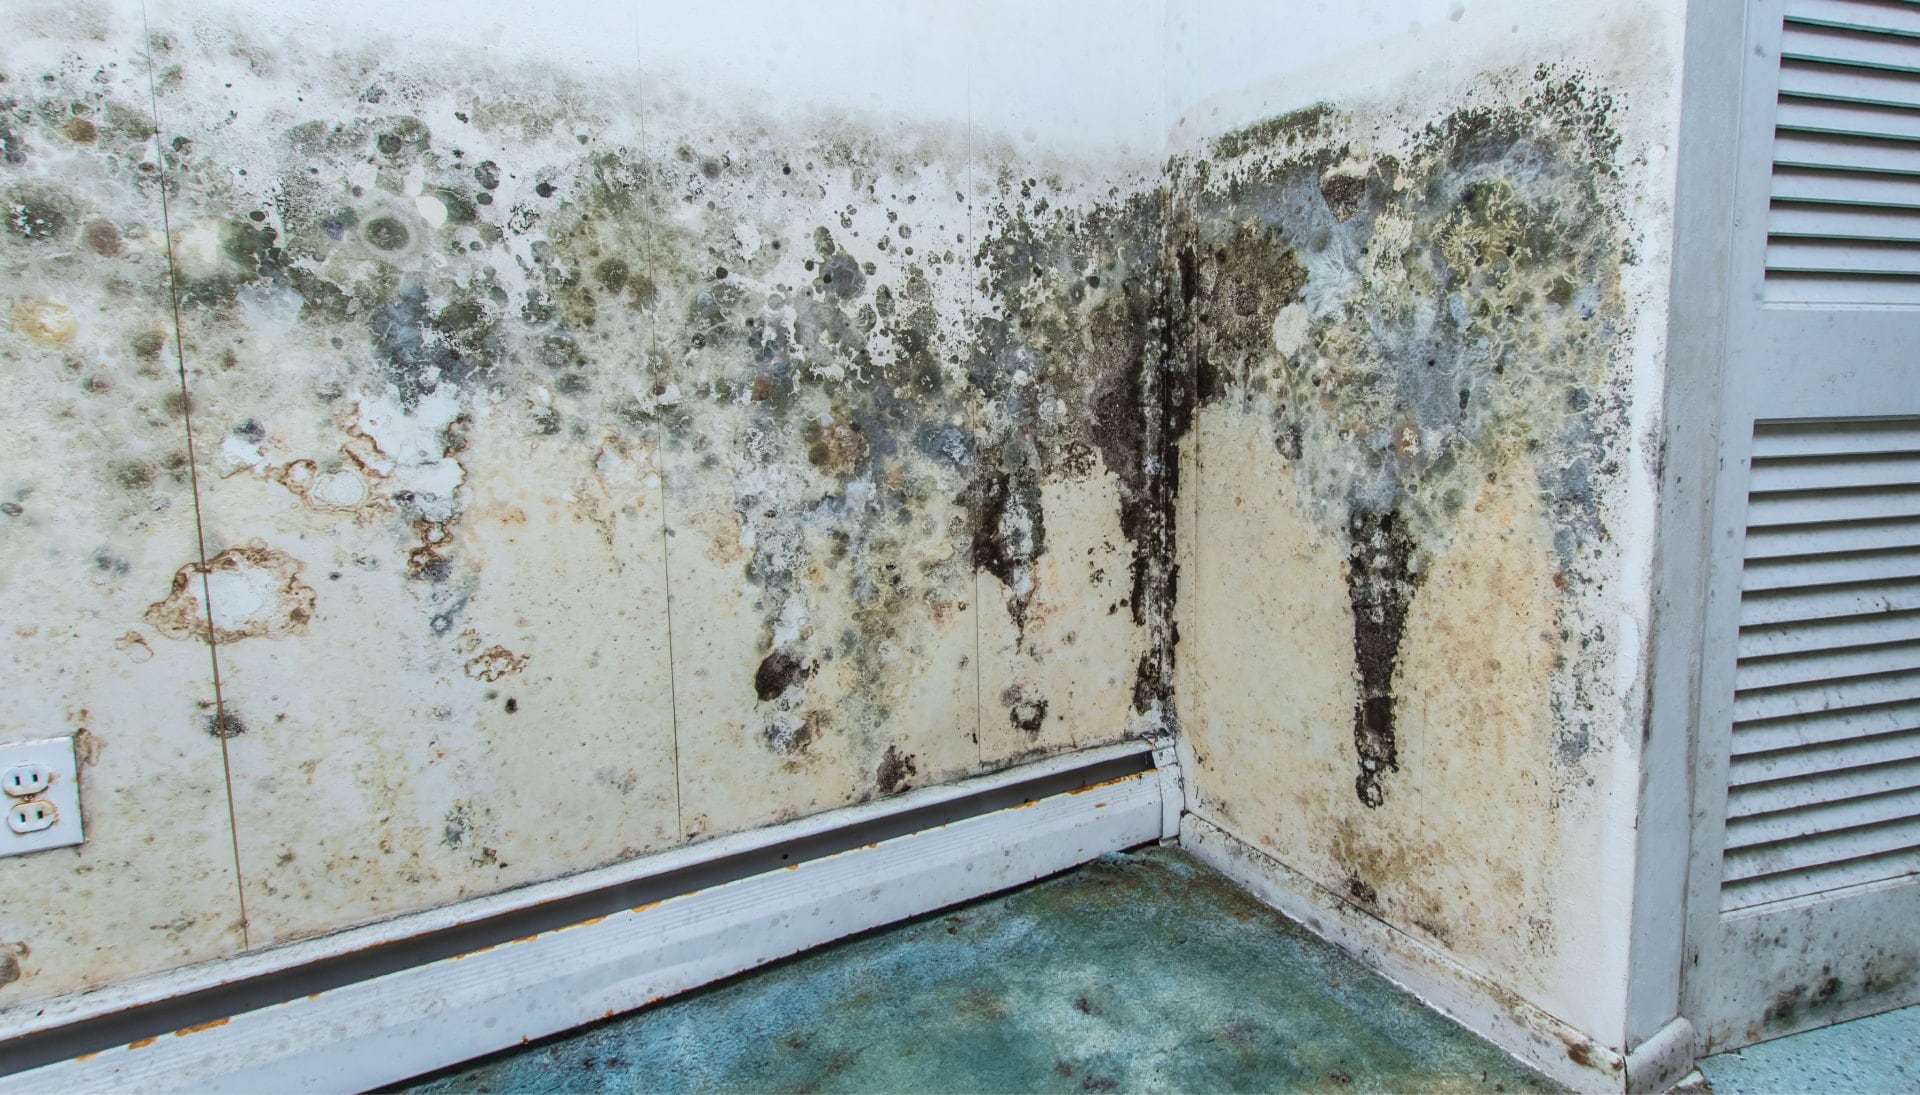 A mold remediation team using specialized techniques to remove mold damage and control odors in a Richmond property, with a focus on safety and efficiency